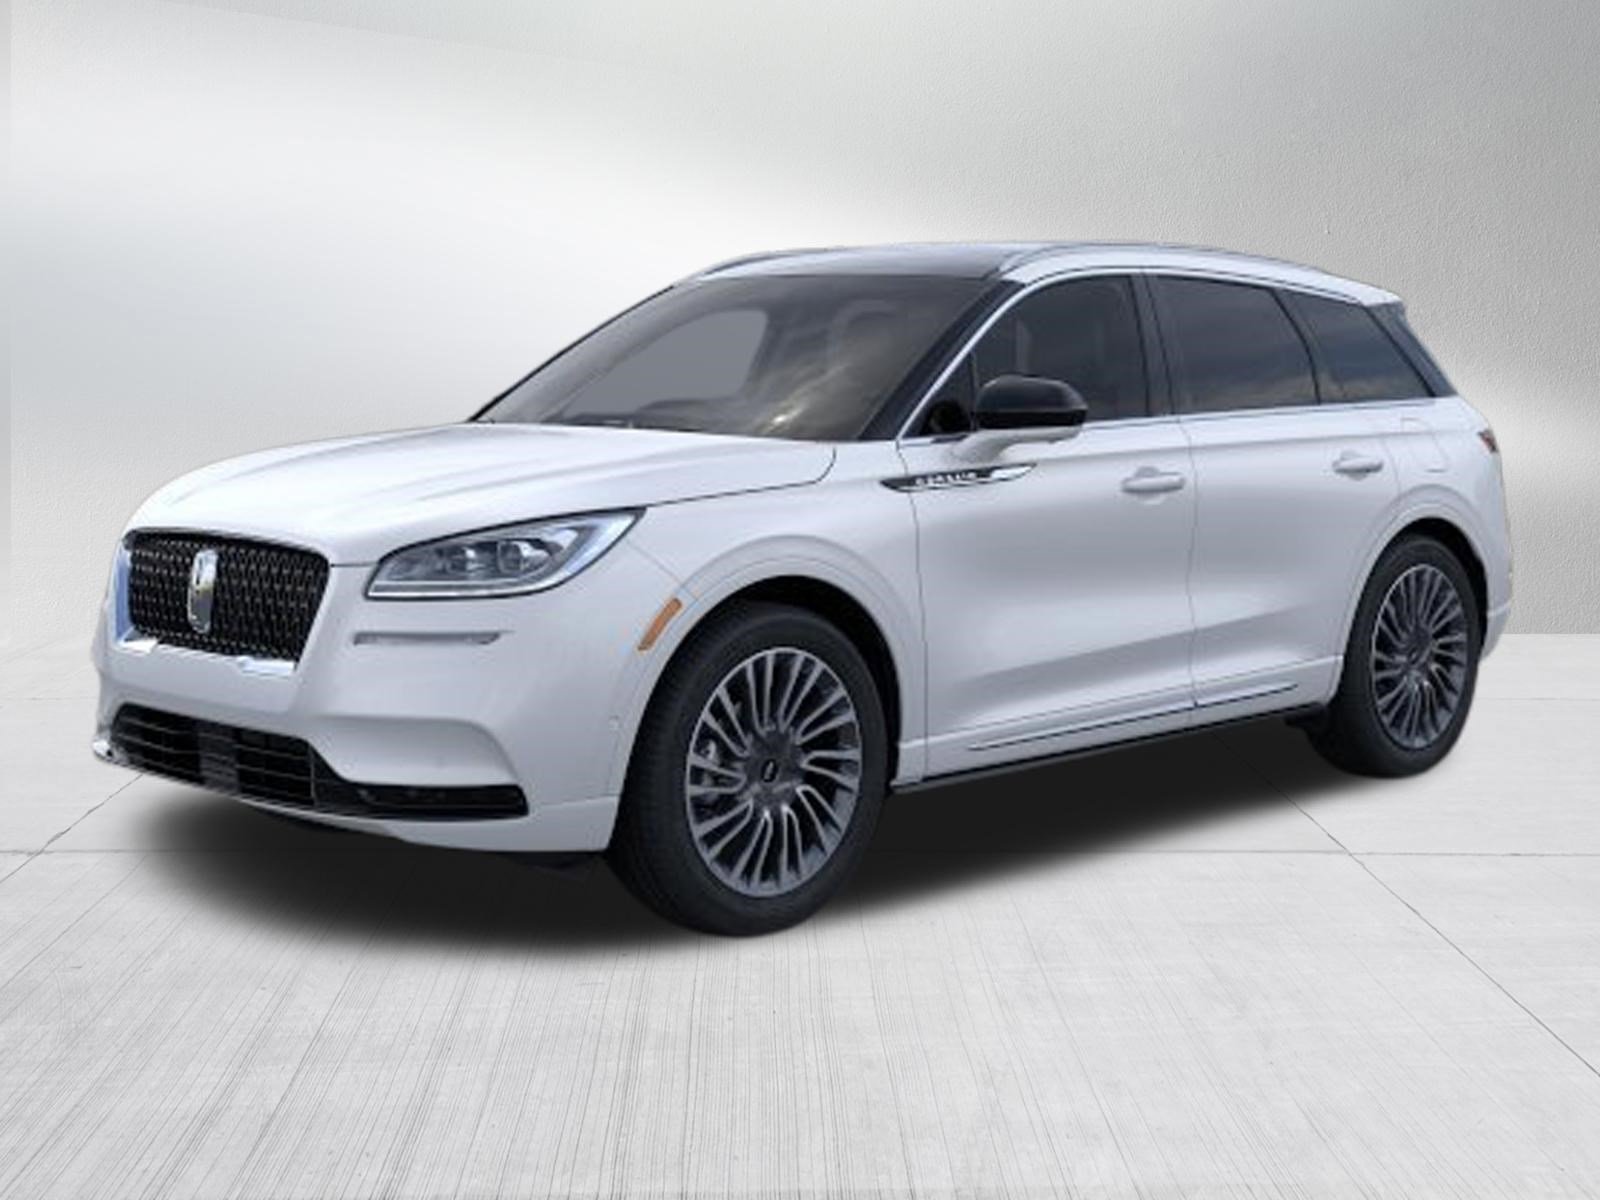 New Lincoln Cars SUVs in Stock - Minneapolis, MN | Luther Automotive